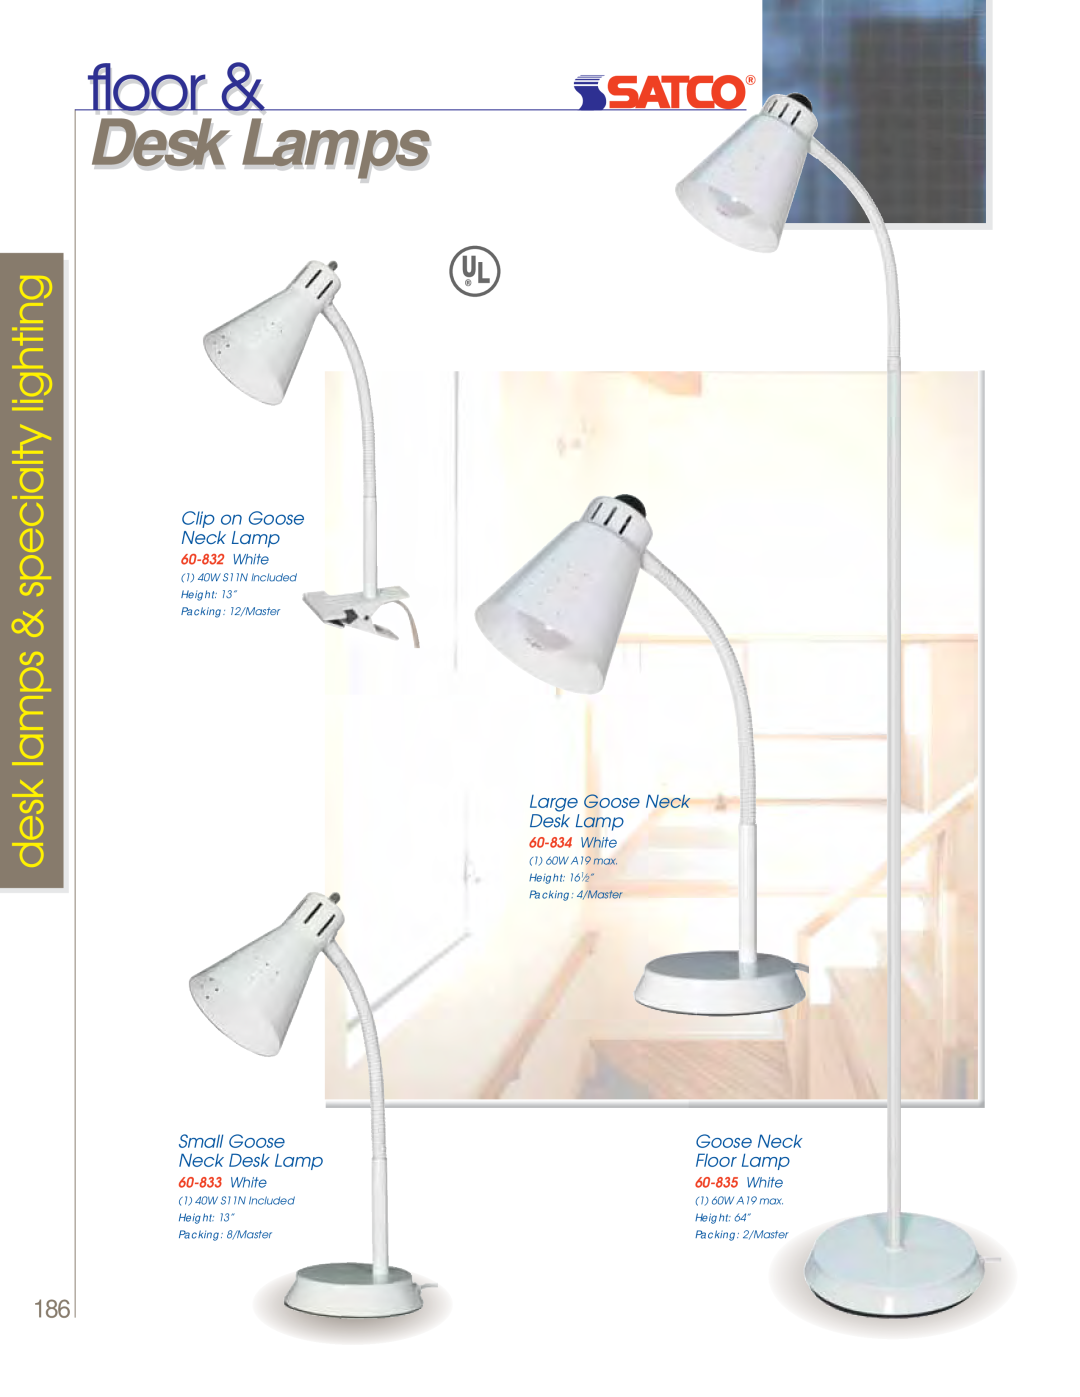 Satco Products 60-800 floor, Desk Lamps, desk lamps & specialty lighting, Clip on Goose Neck Lamp, Small Goose, Floor Lamp 